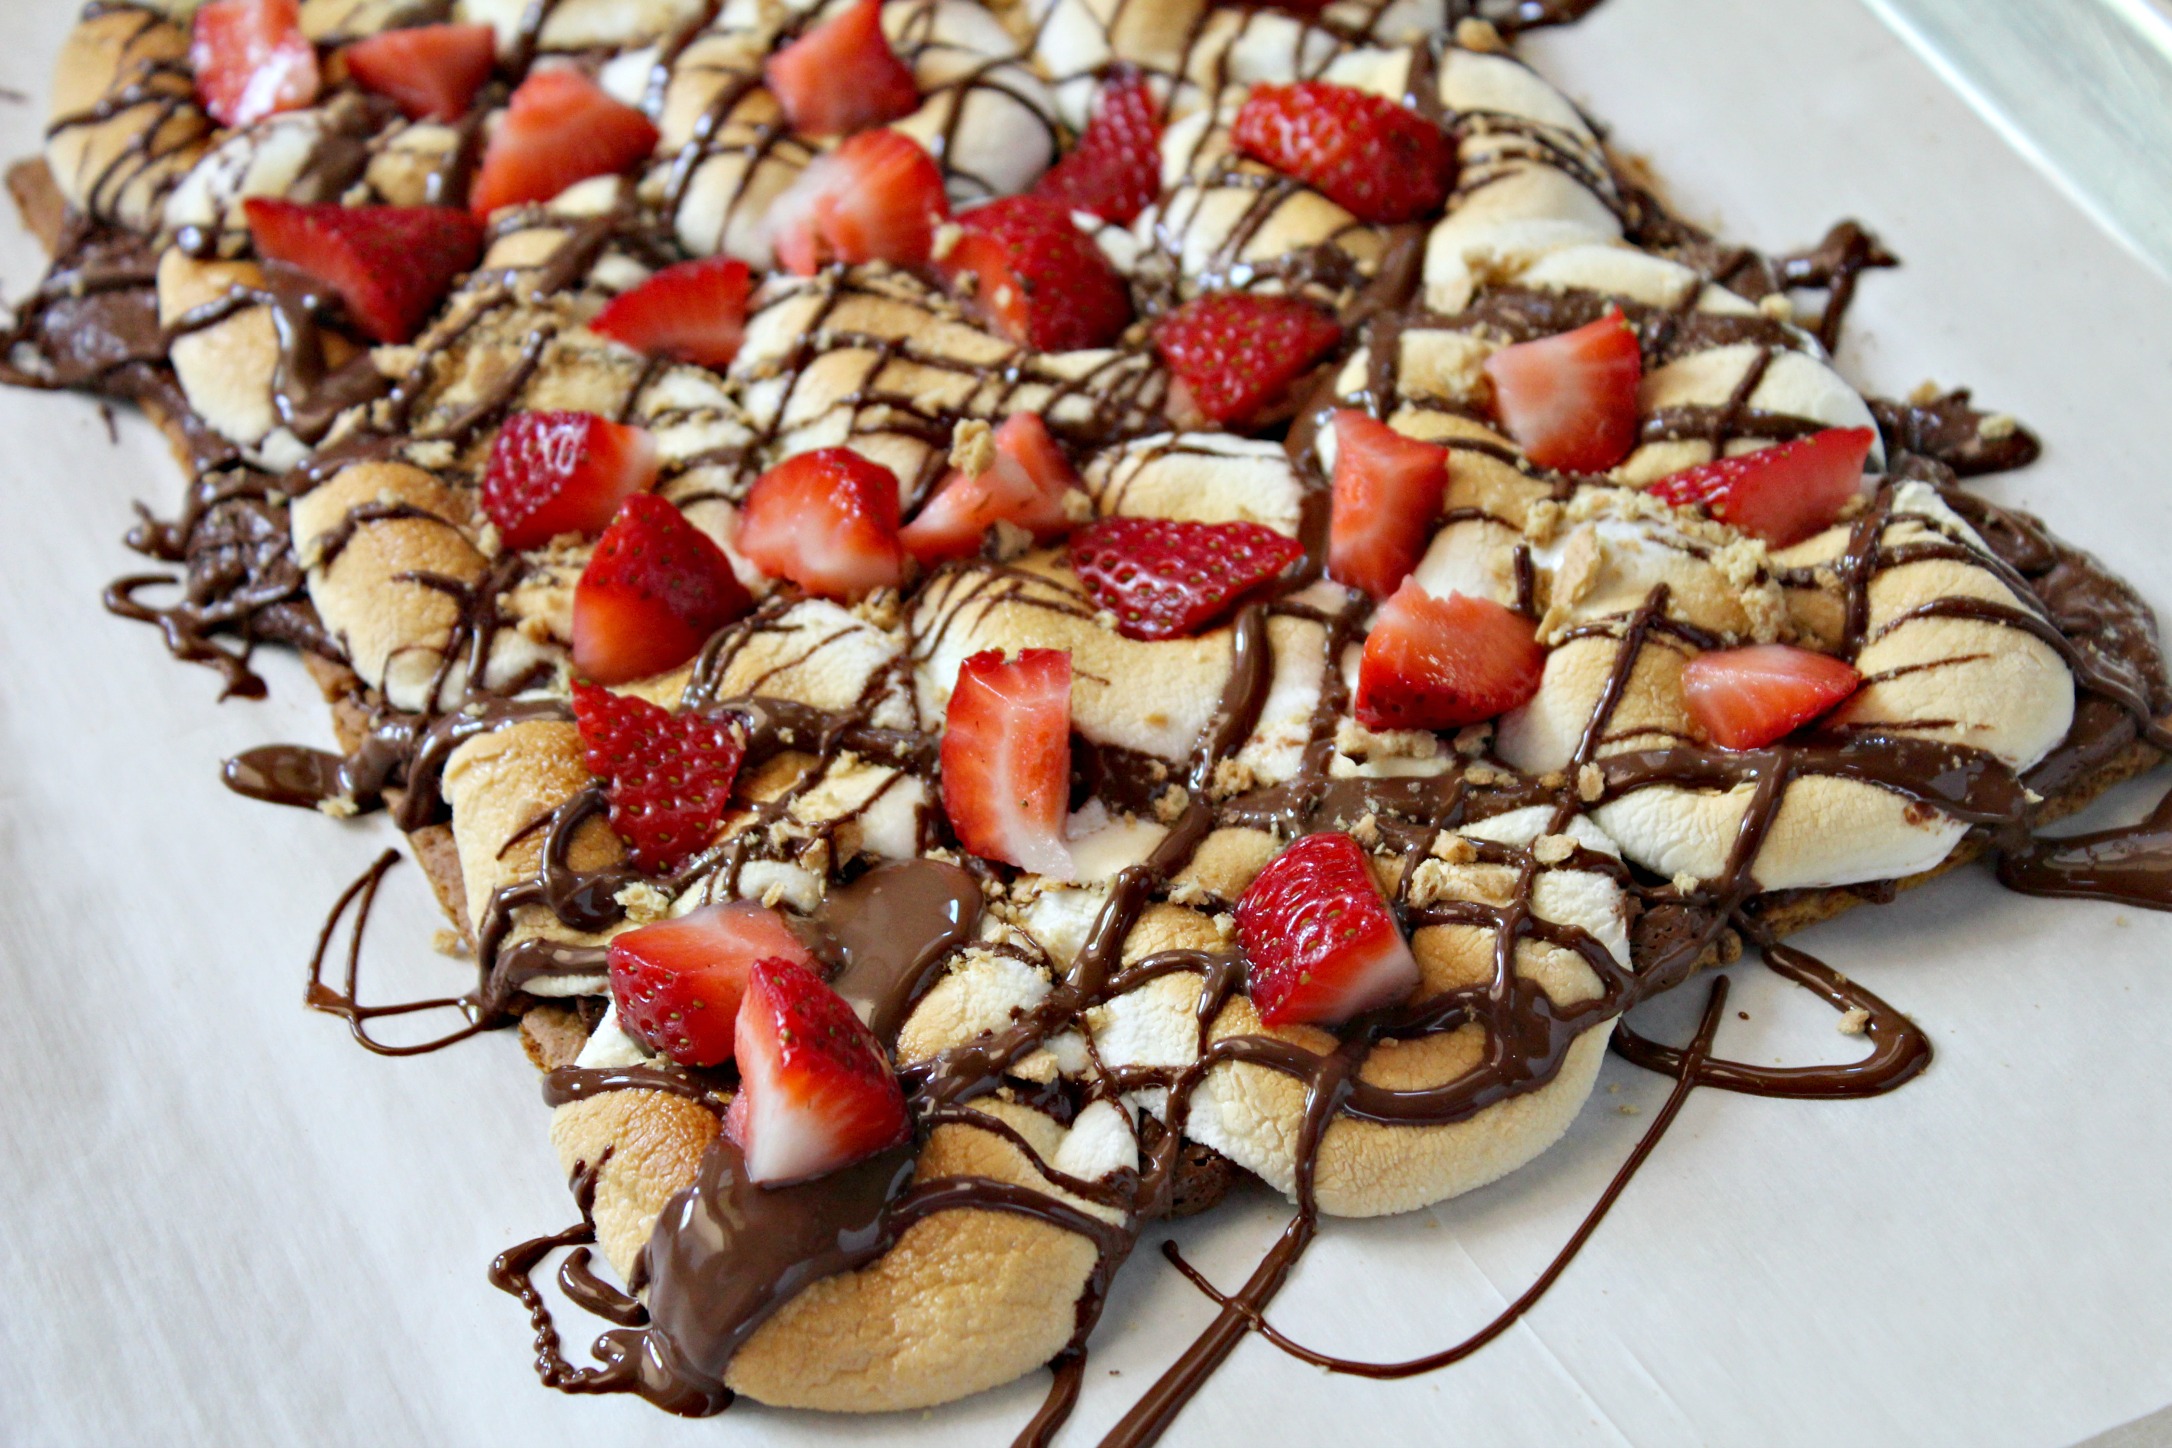 Oven Baked Strawberry Smores